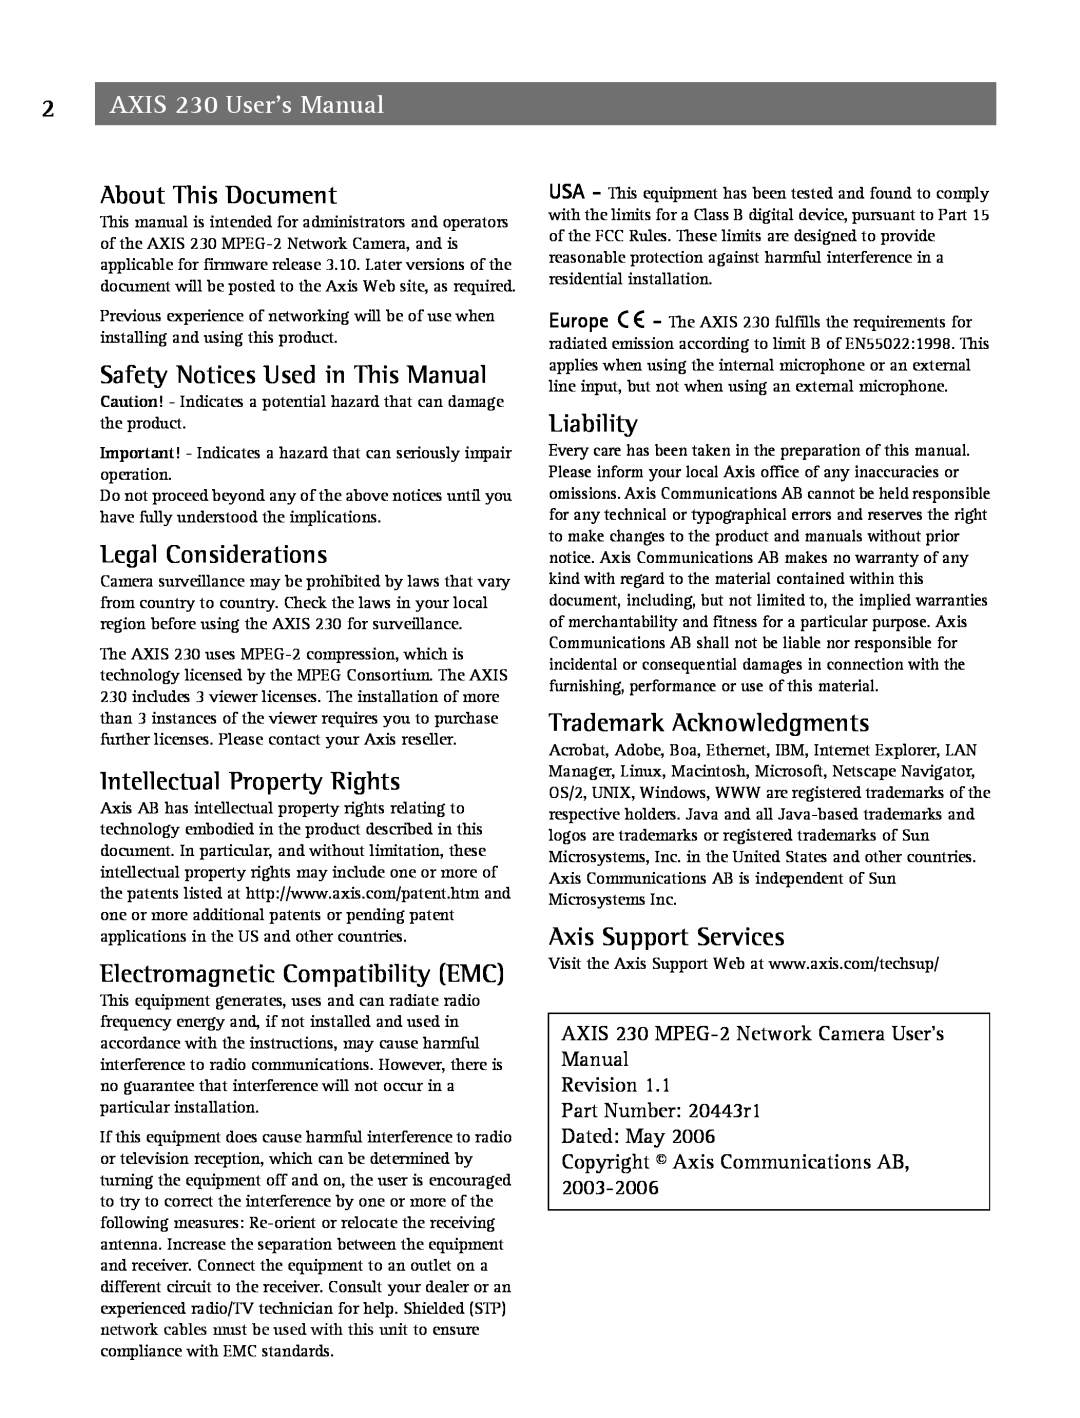 Axis Communications 2 user manual About This Document, Safety Notices Used in This Manual, Legal Considerations, Liability 